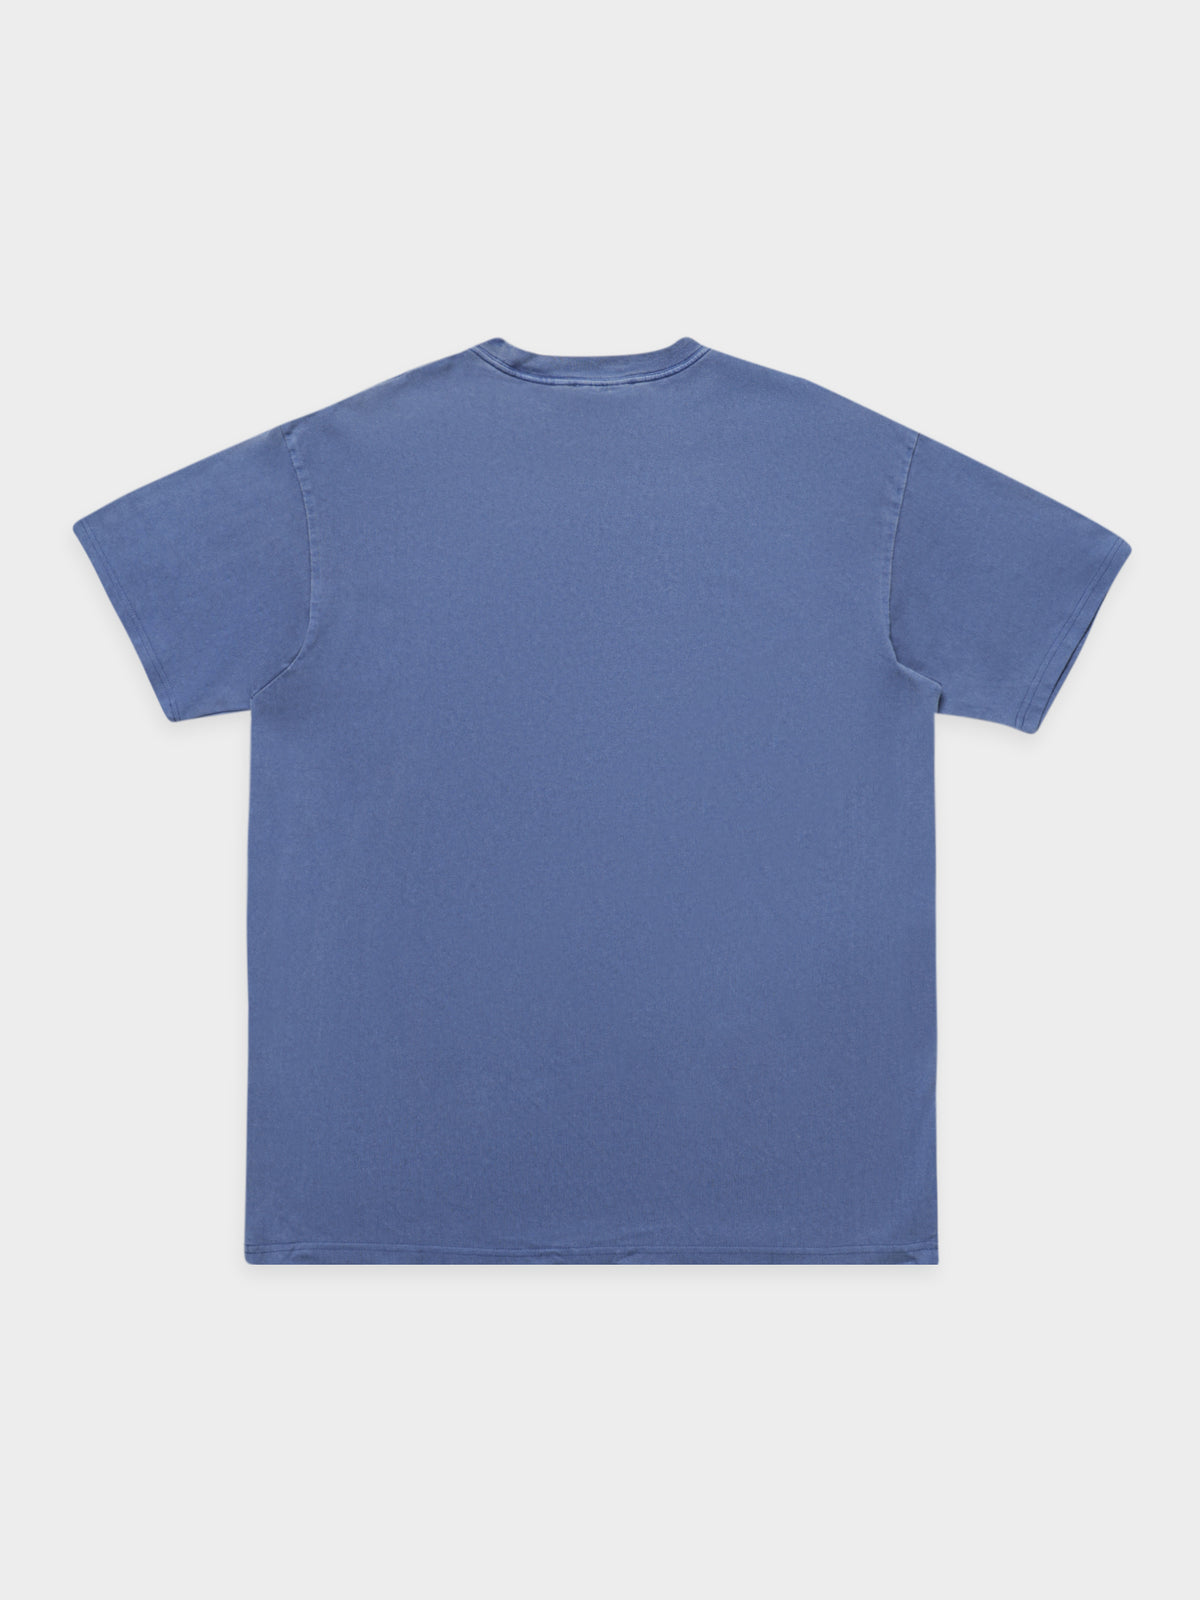 Duster T-Shirt in Navy